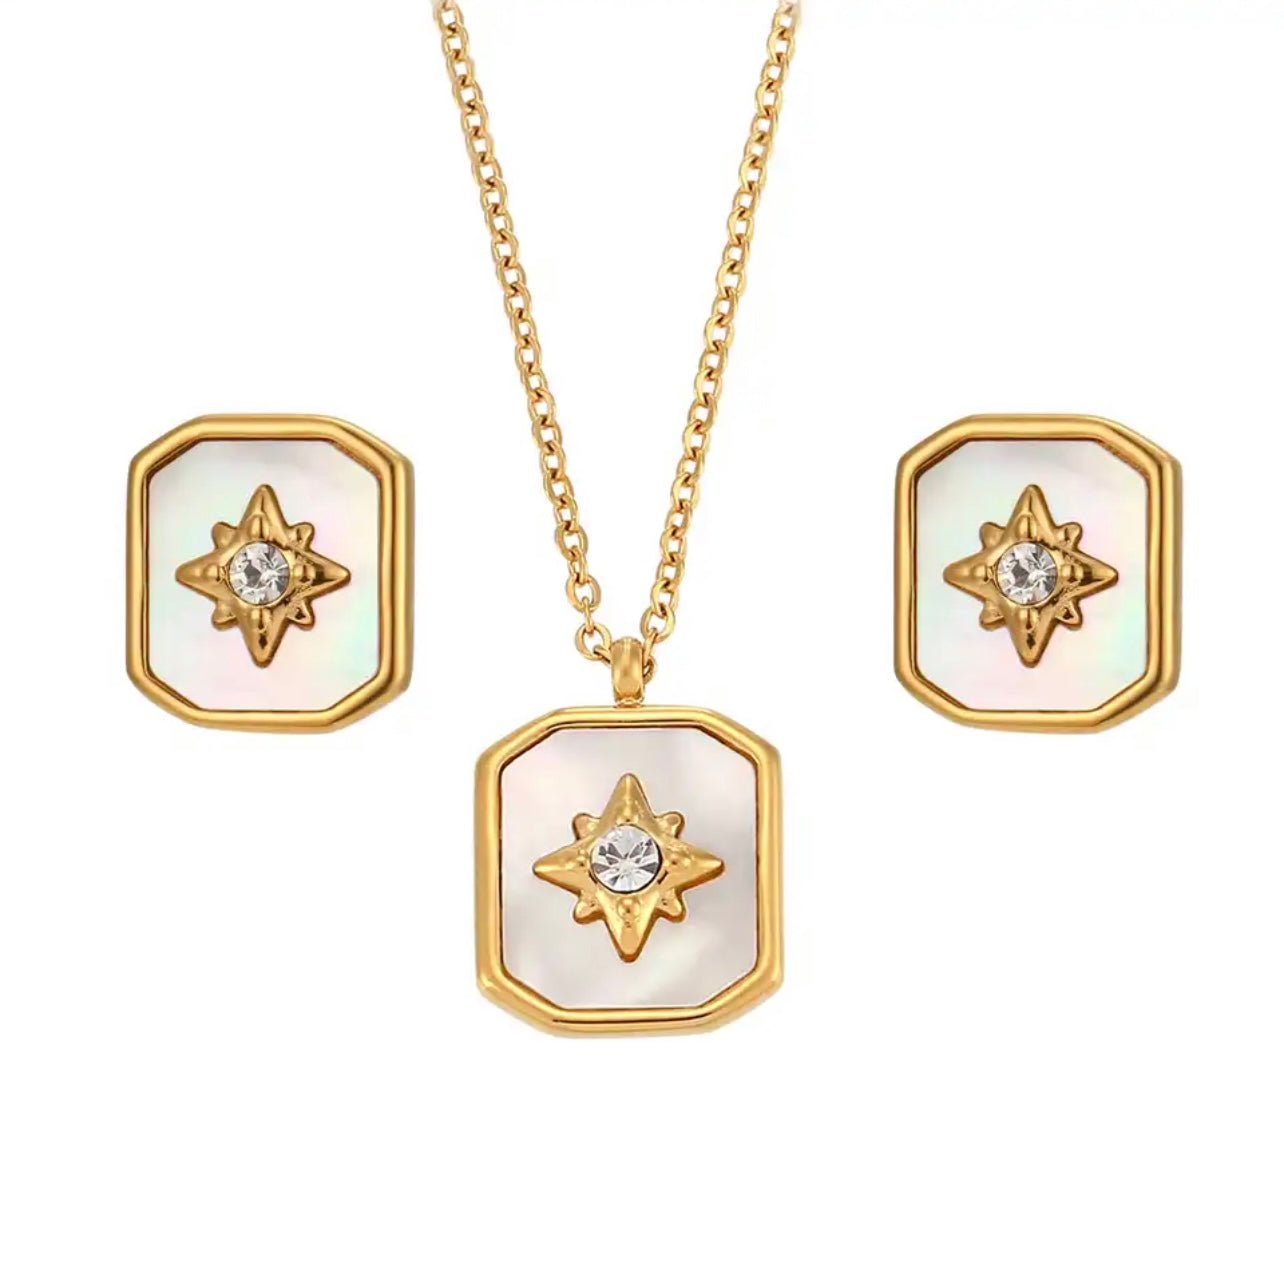 Louis Vuitton on X: Crafted to shine. A diamond pendant necklace